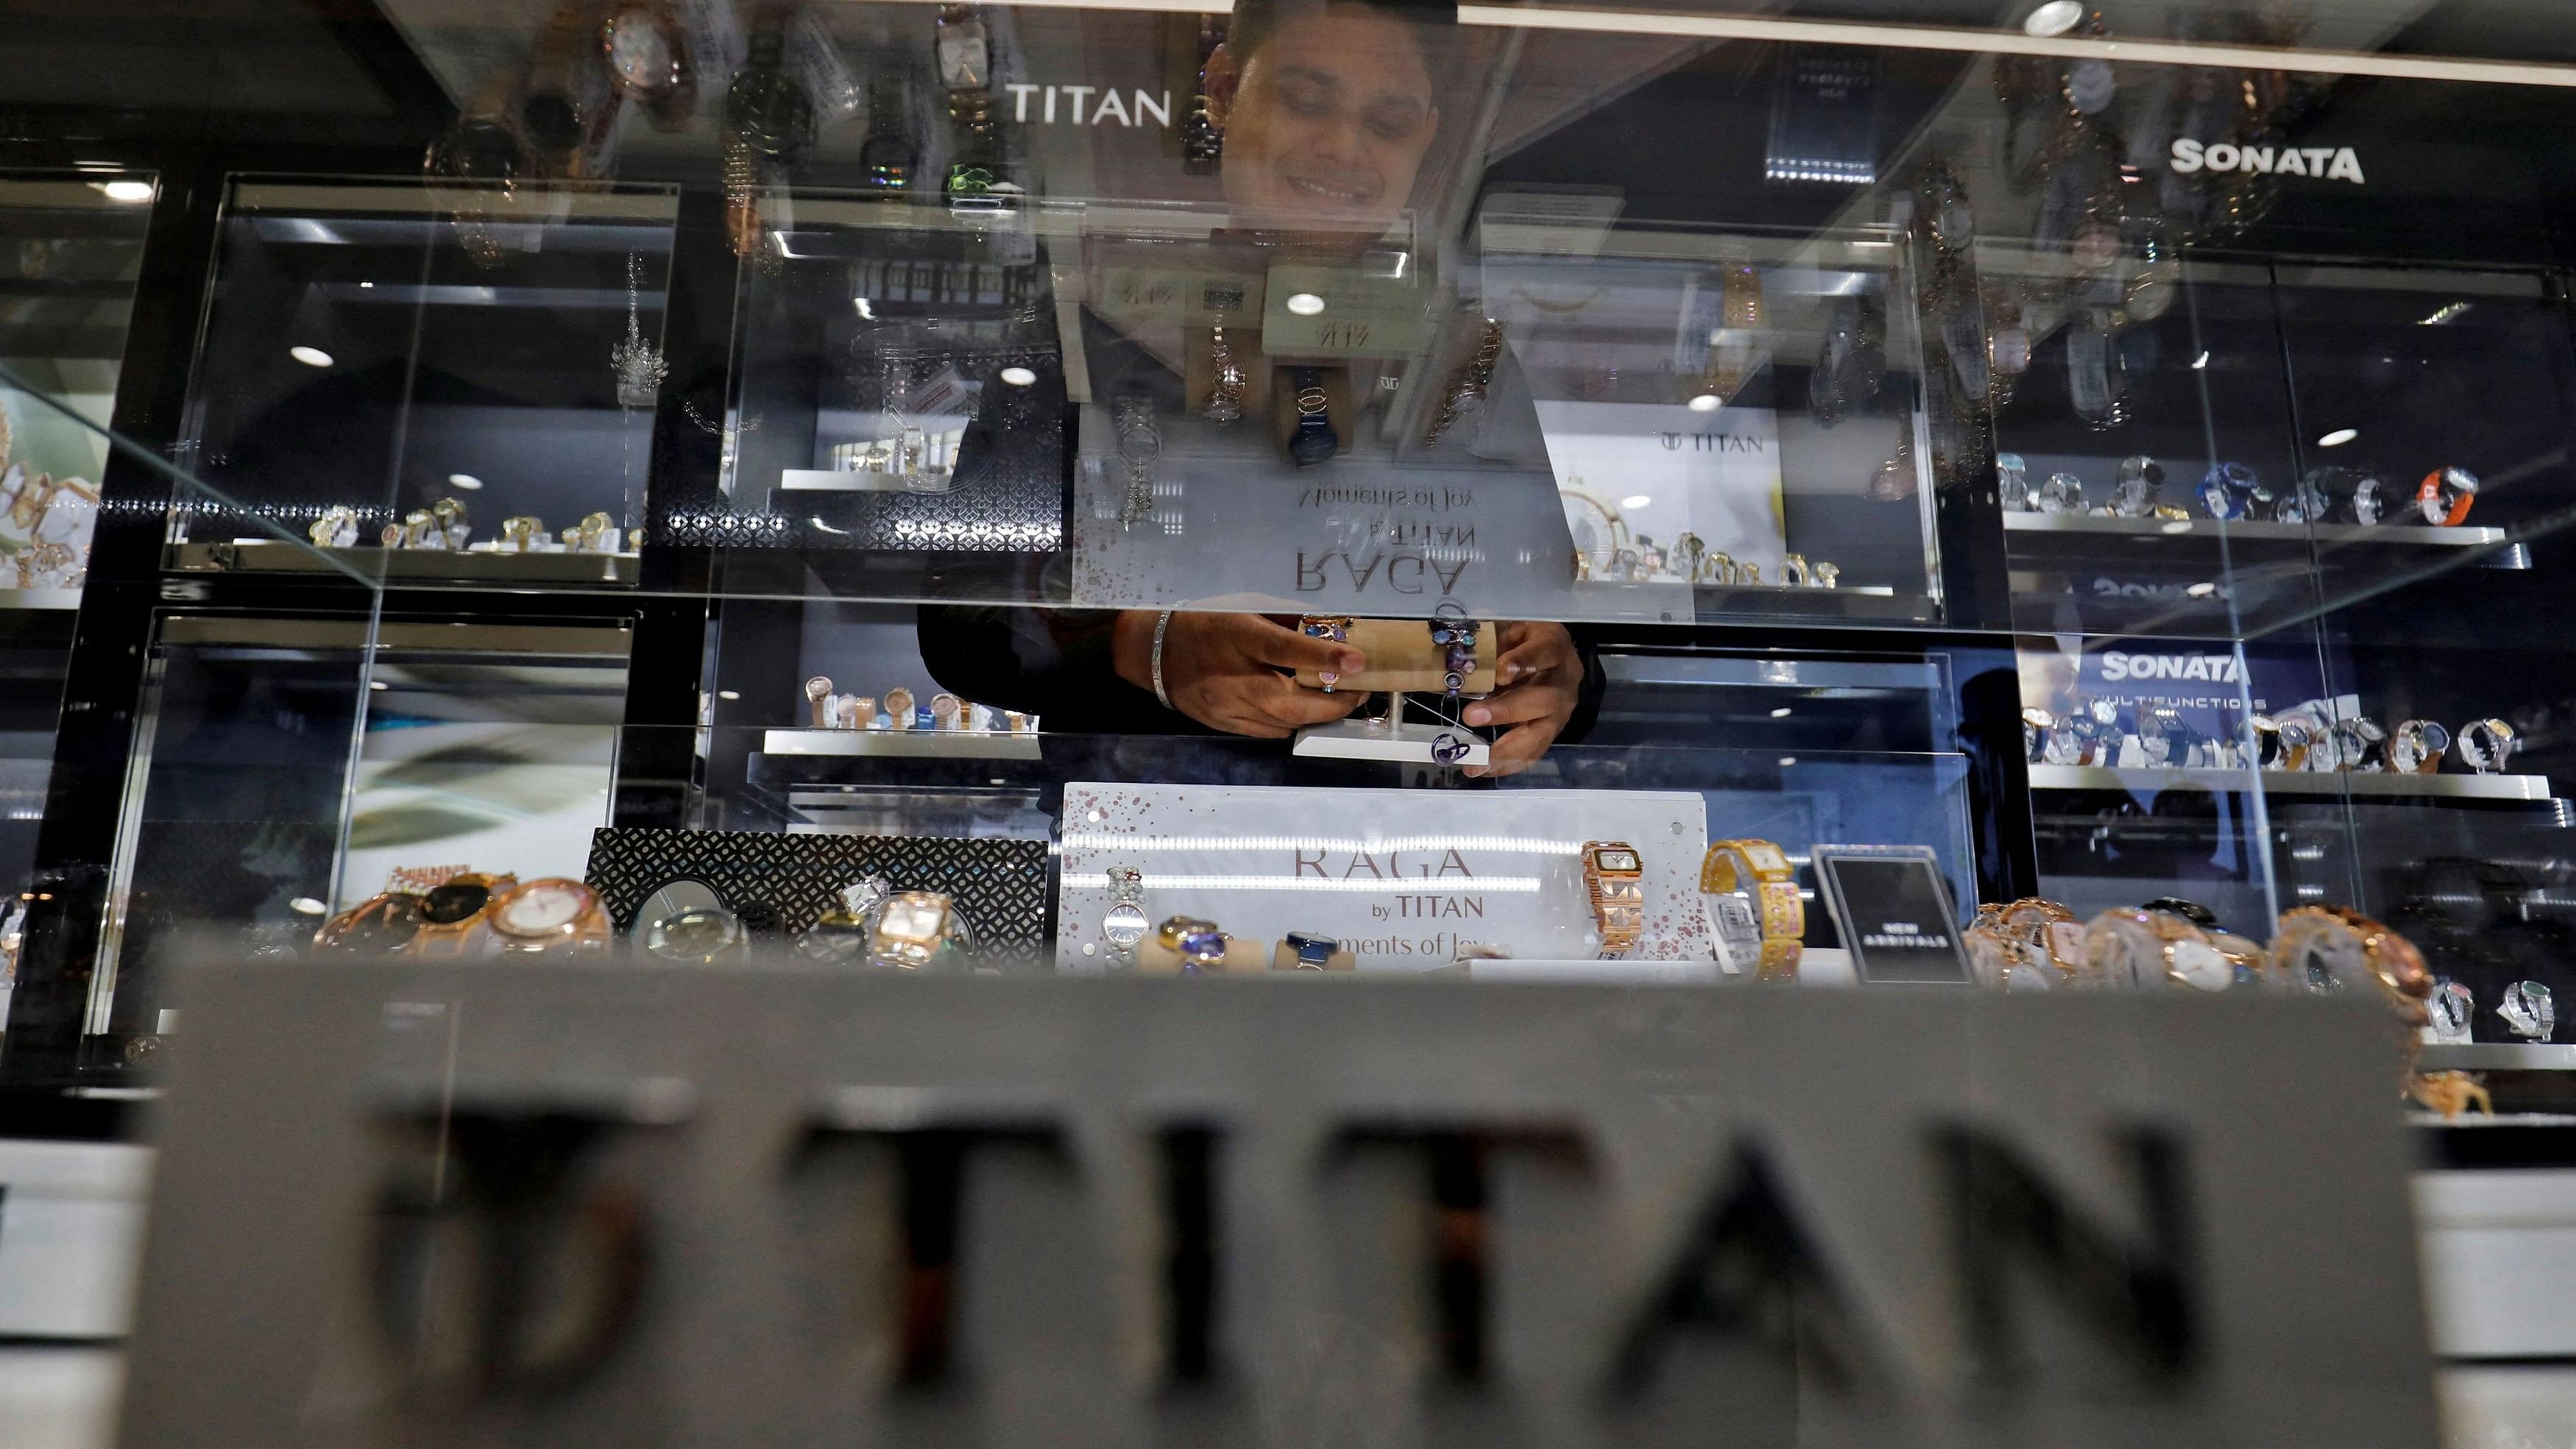 <div class="paragraphs"><p>Over the cost of the acquisition, Titan said it will pay 'Rs 4,621 crore towards the purchase of 27.18 per cent equity shares of CaratLane on a fully diluted basis'.</p><p></p></div>